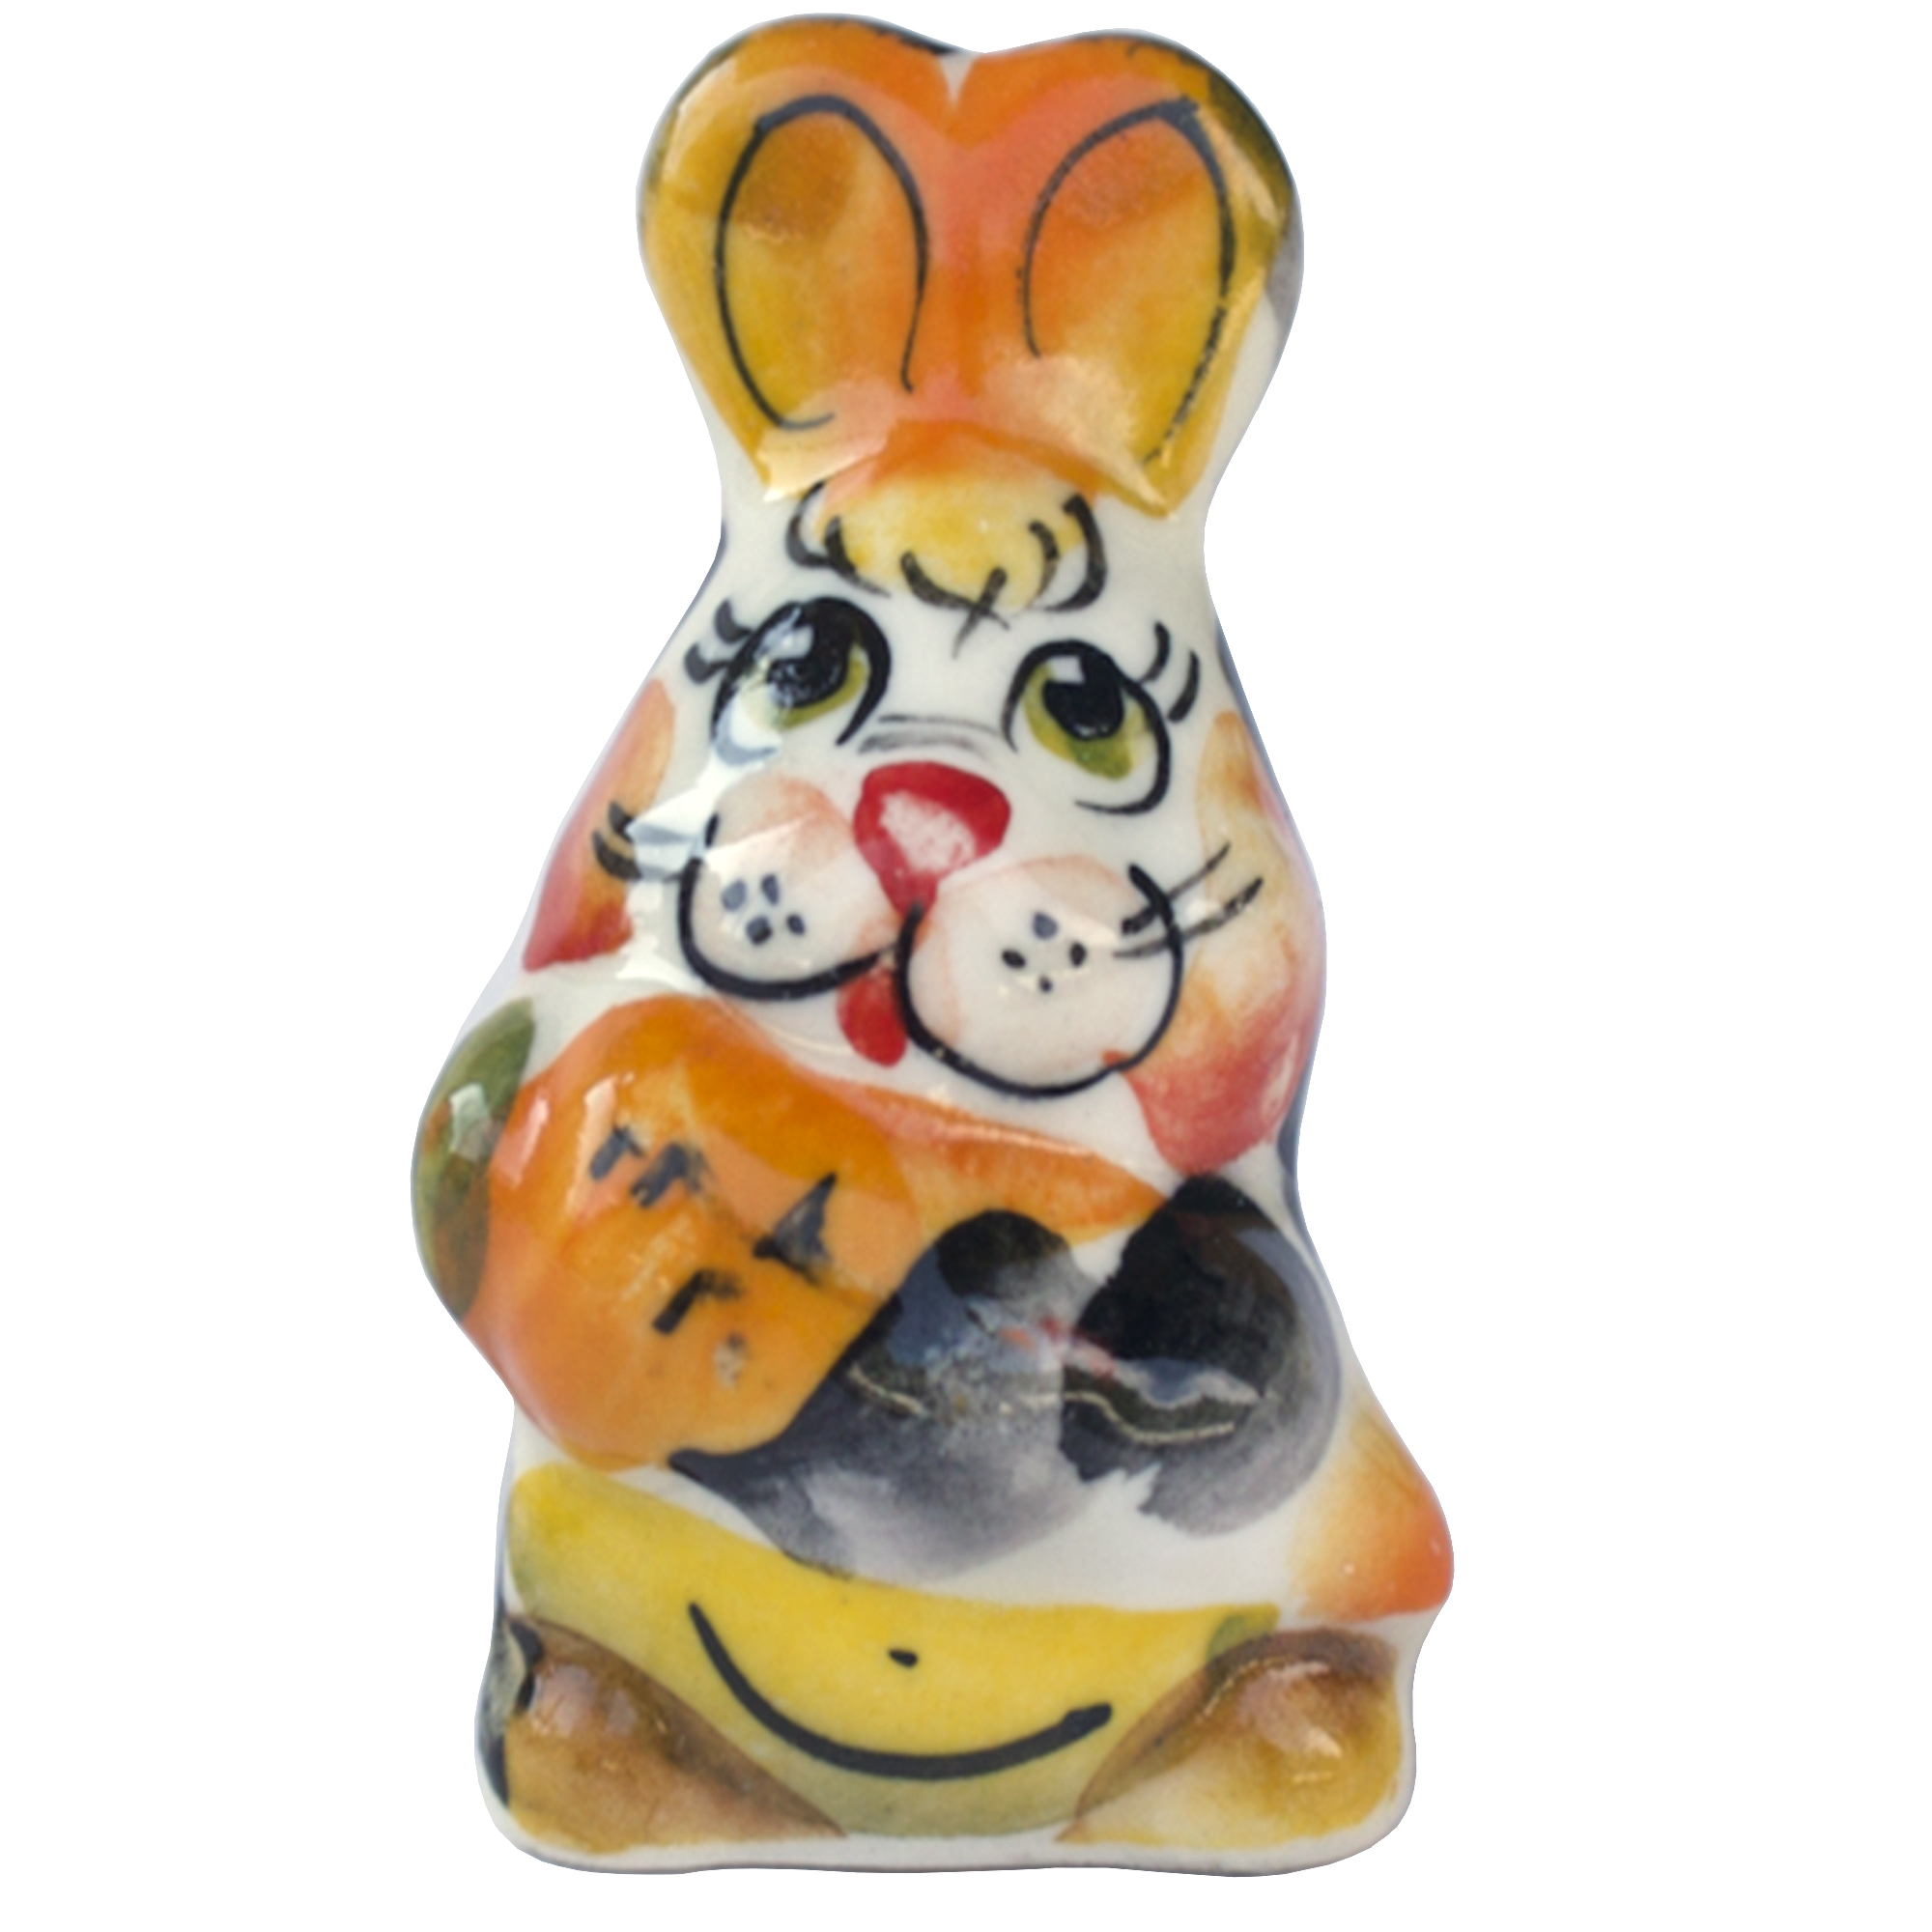 Ceramic Figurine Gzhel Colored Easter Little Rabbit with Carrot, 1.7